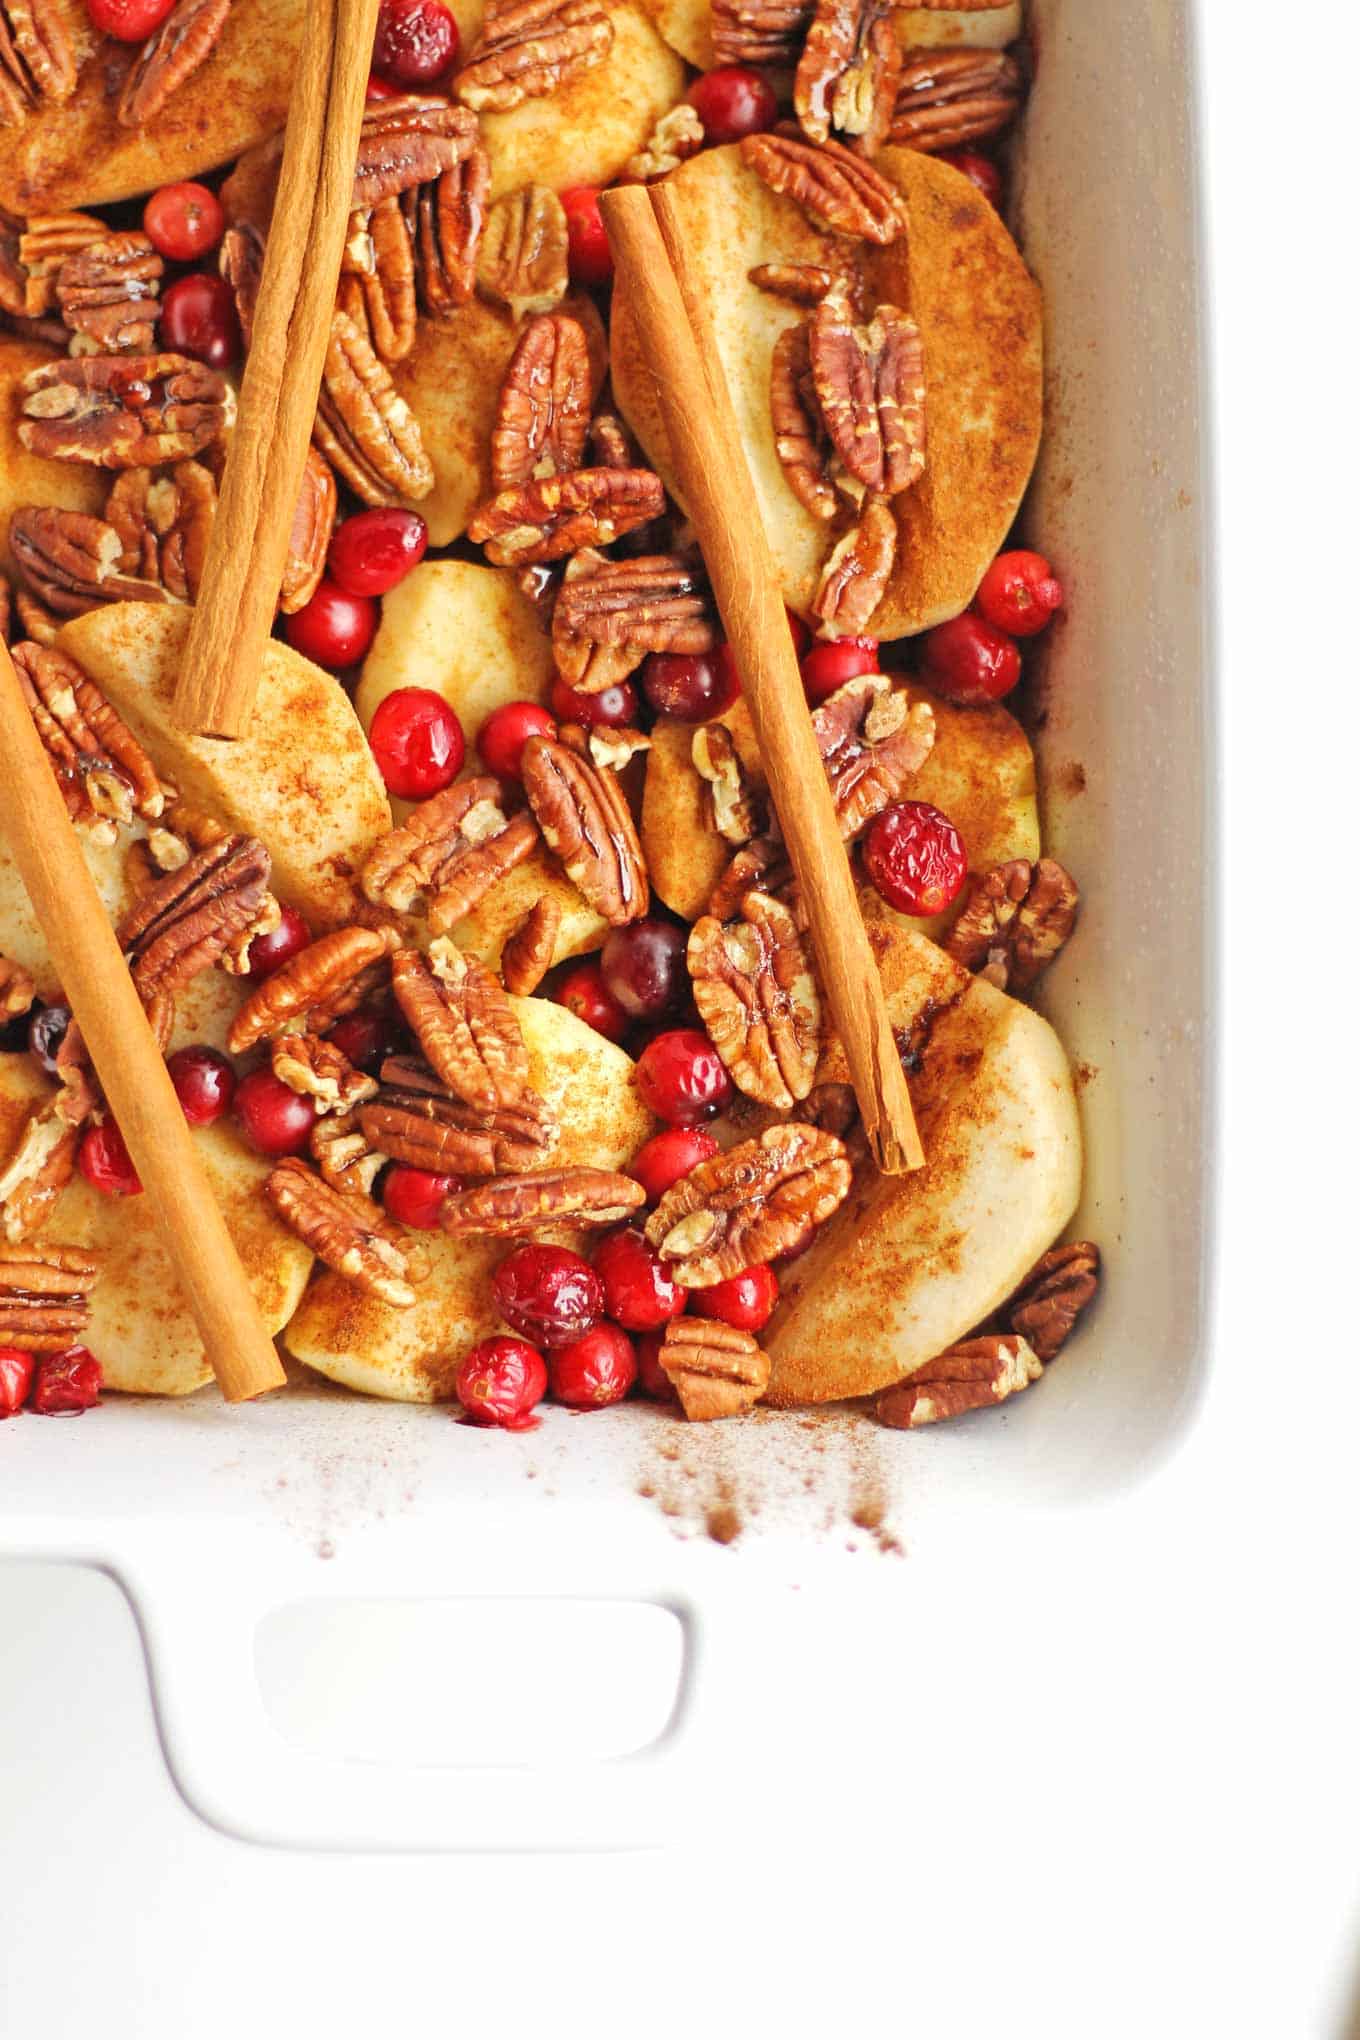 Baked fruit casserole for fall